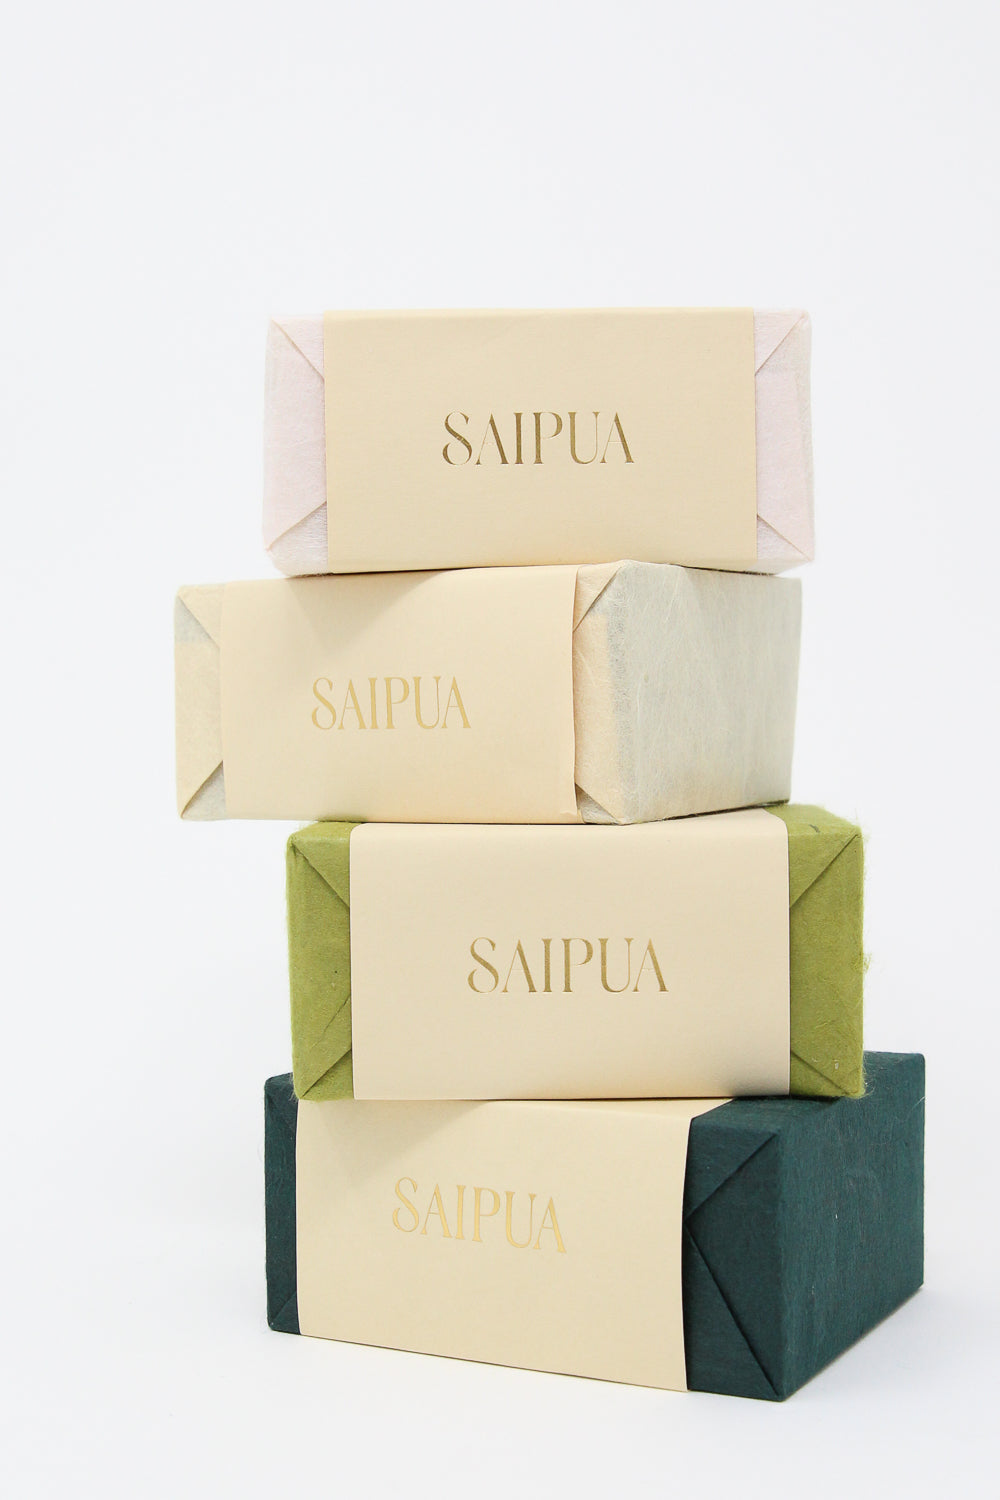 Saipua Olive Oil Soap group view